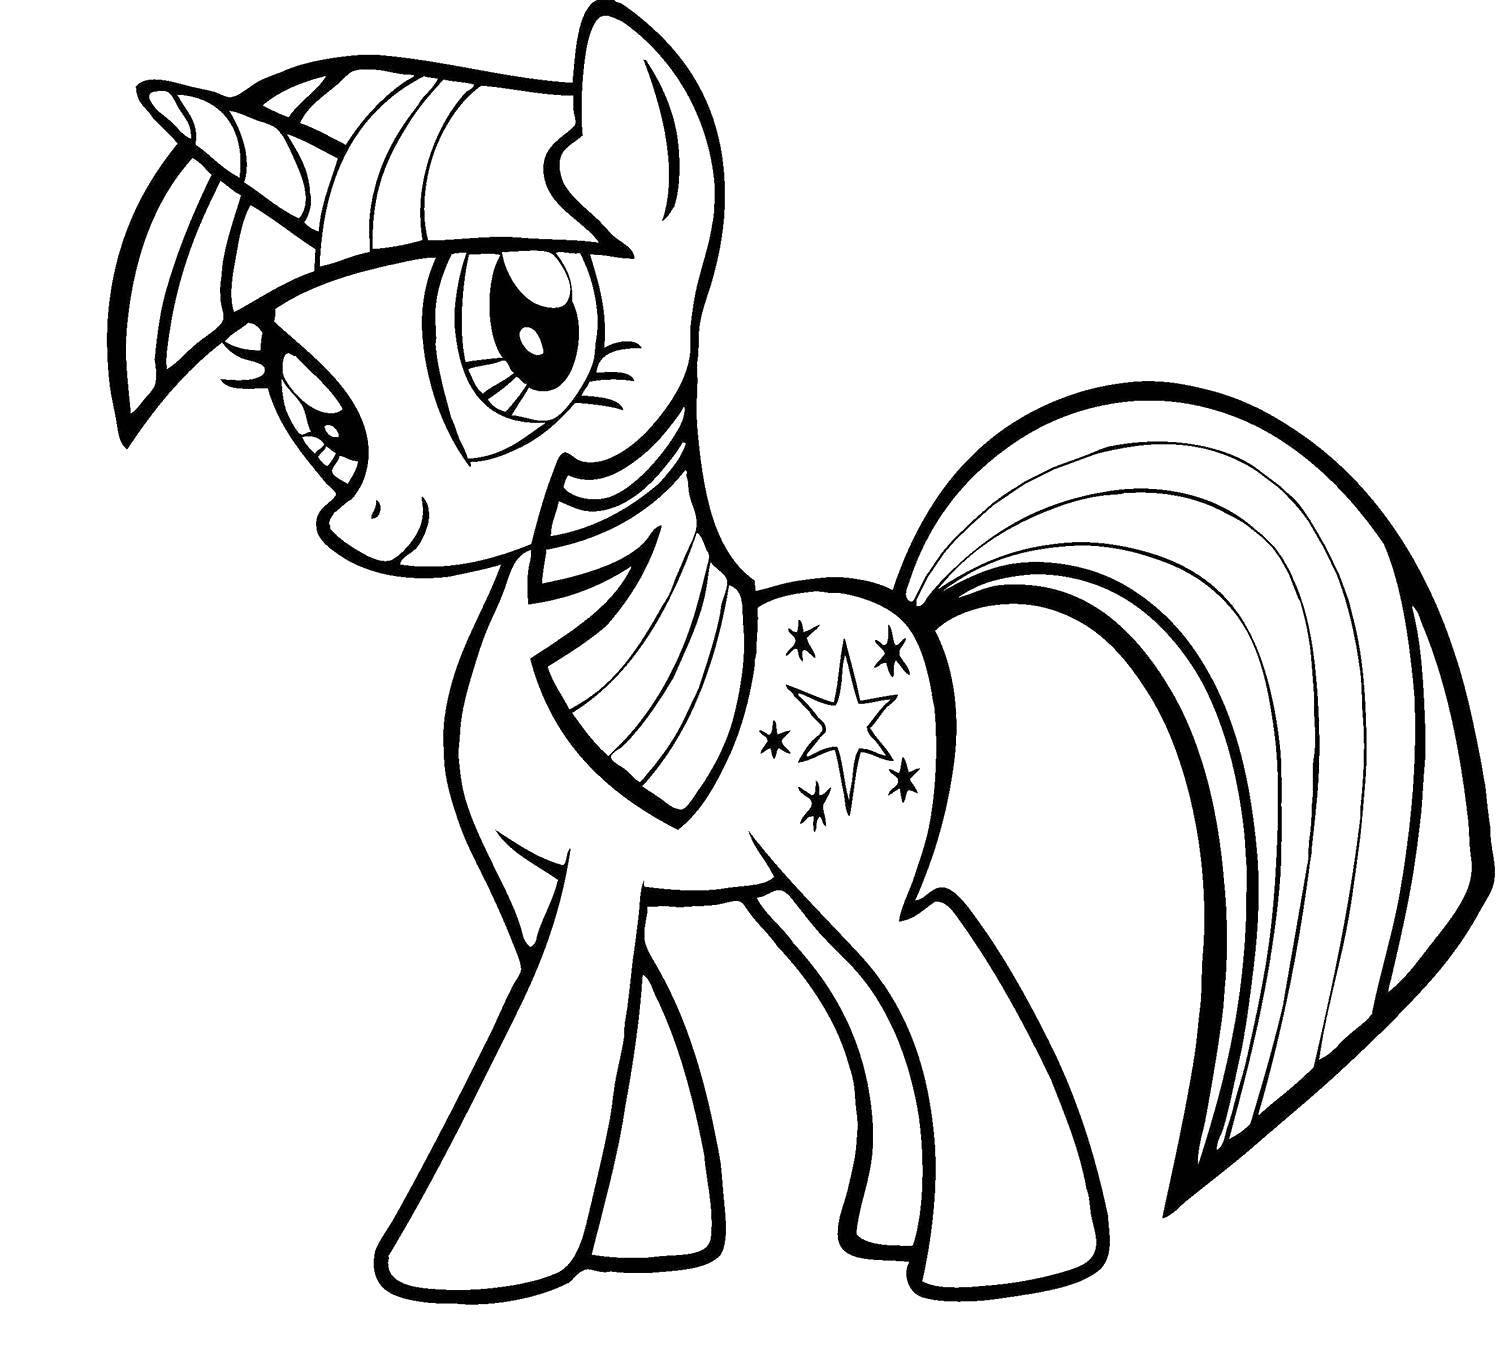 Coloring Pony. Category Ponies. Tags:  Pony, My little pony.